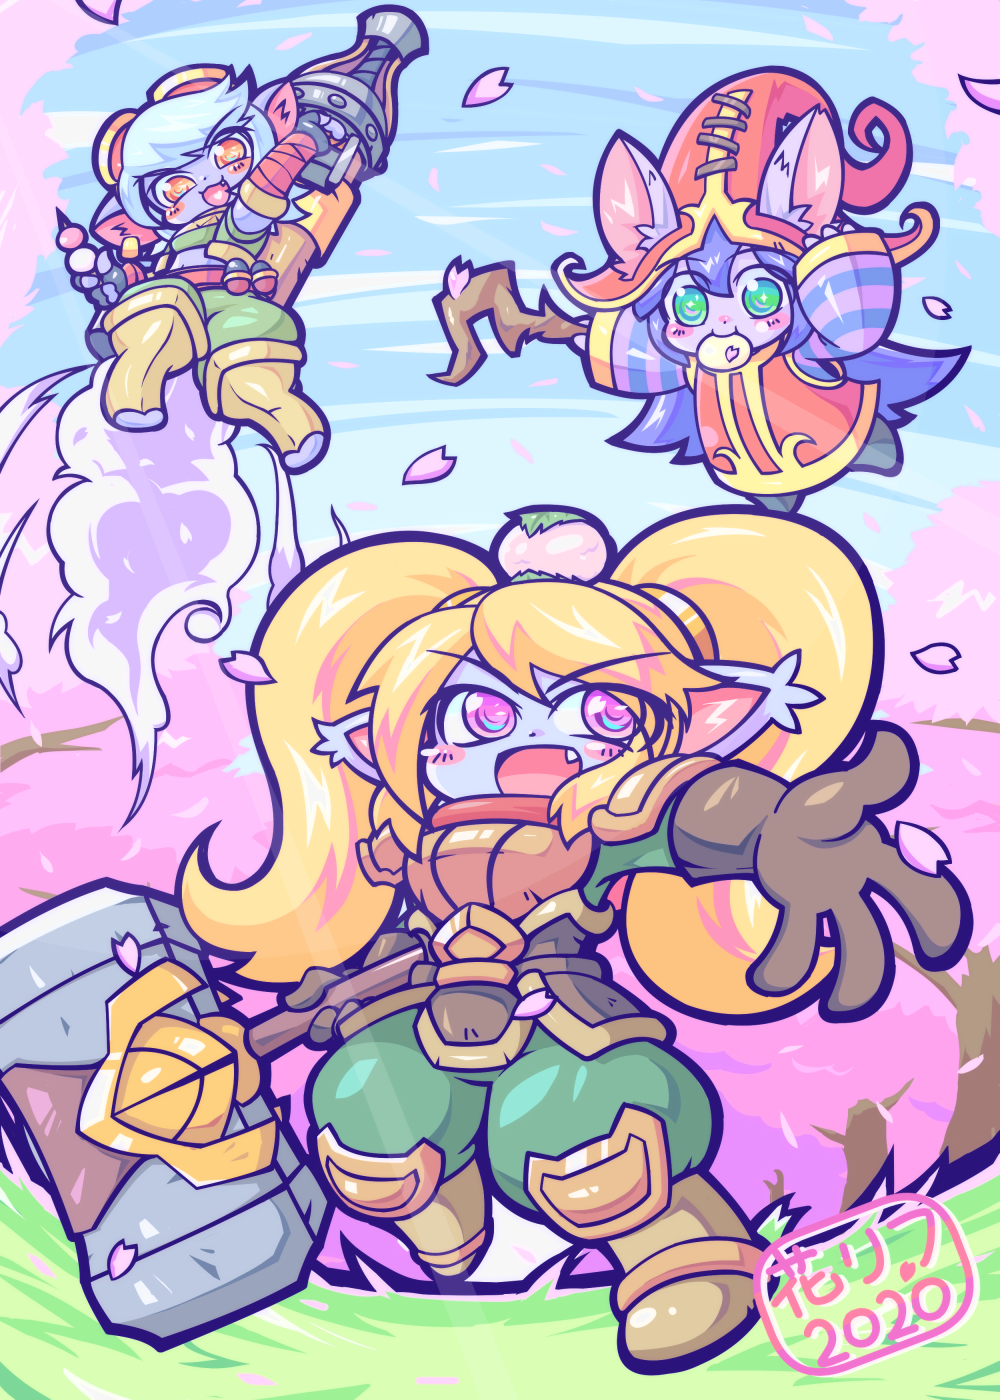 3girls :3 :d animal_ears blonde_hair blush_stickers cherry_blossoms commentary_request dango eyebrows_visible_through_hair fang food food_in_mouth goggles goggles_on_head green_eyes highres holding holding_hammer kayo!!_(gotoran) league_of_legends long_hair looking_at_viewer lulu_(league_of_legends) medium_hair multiple_girls open_mouth orange_eyes poppy purple_eyes rocket_jumping silver_hair smile striped_sleeves tristana wagashi yordle